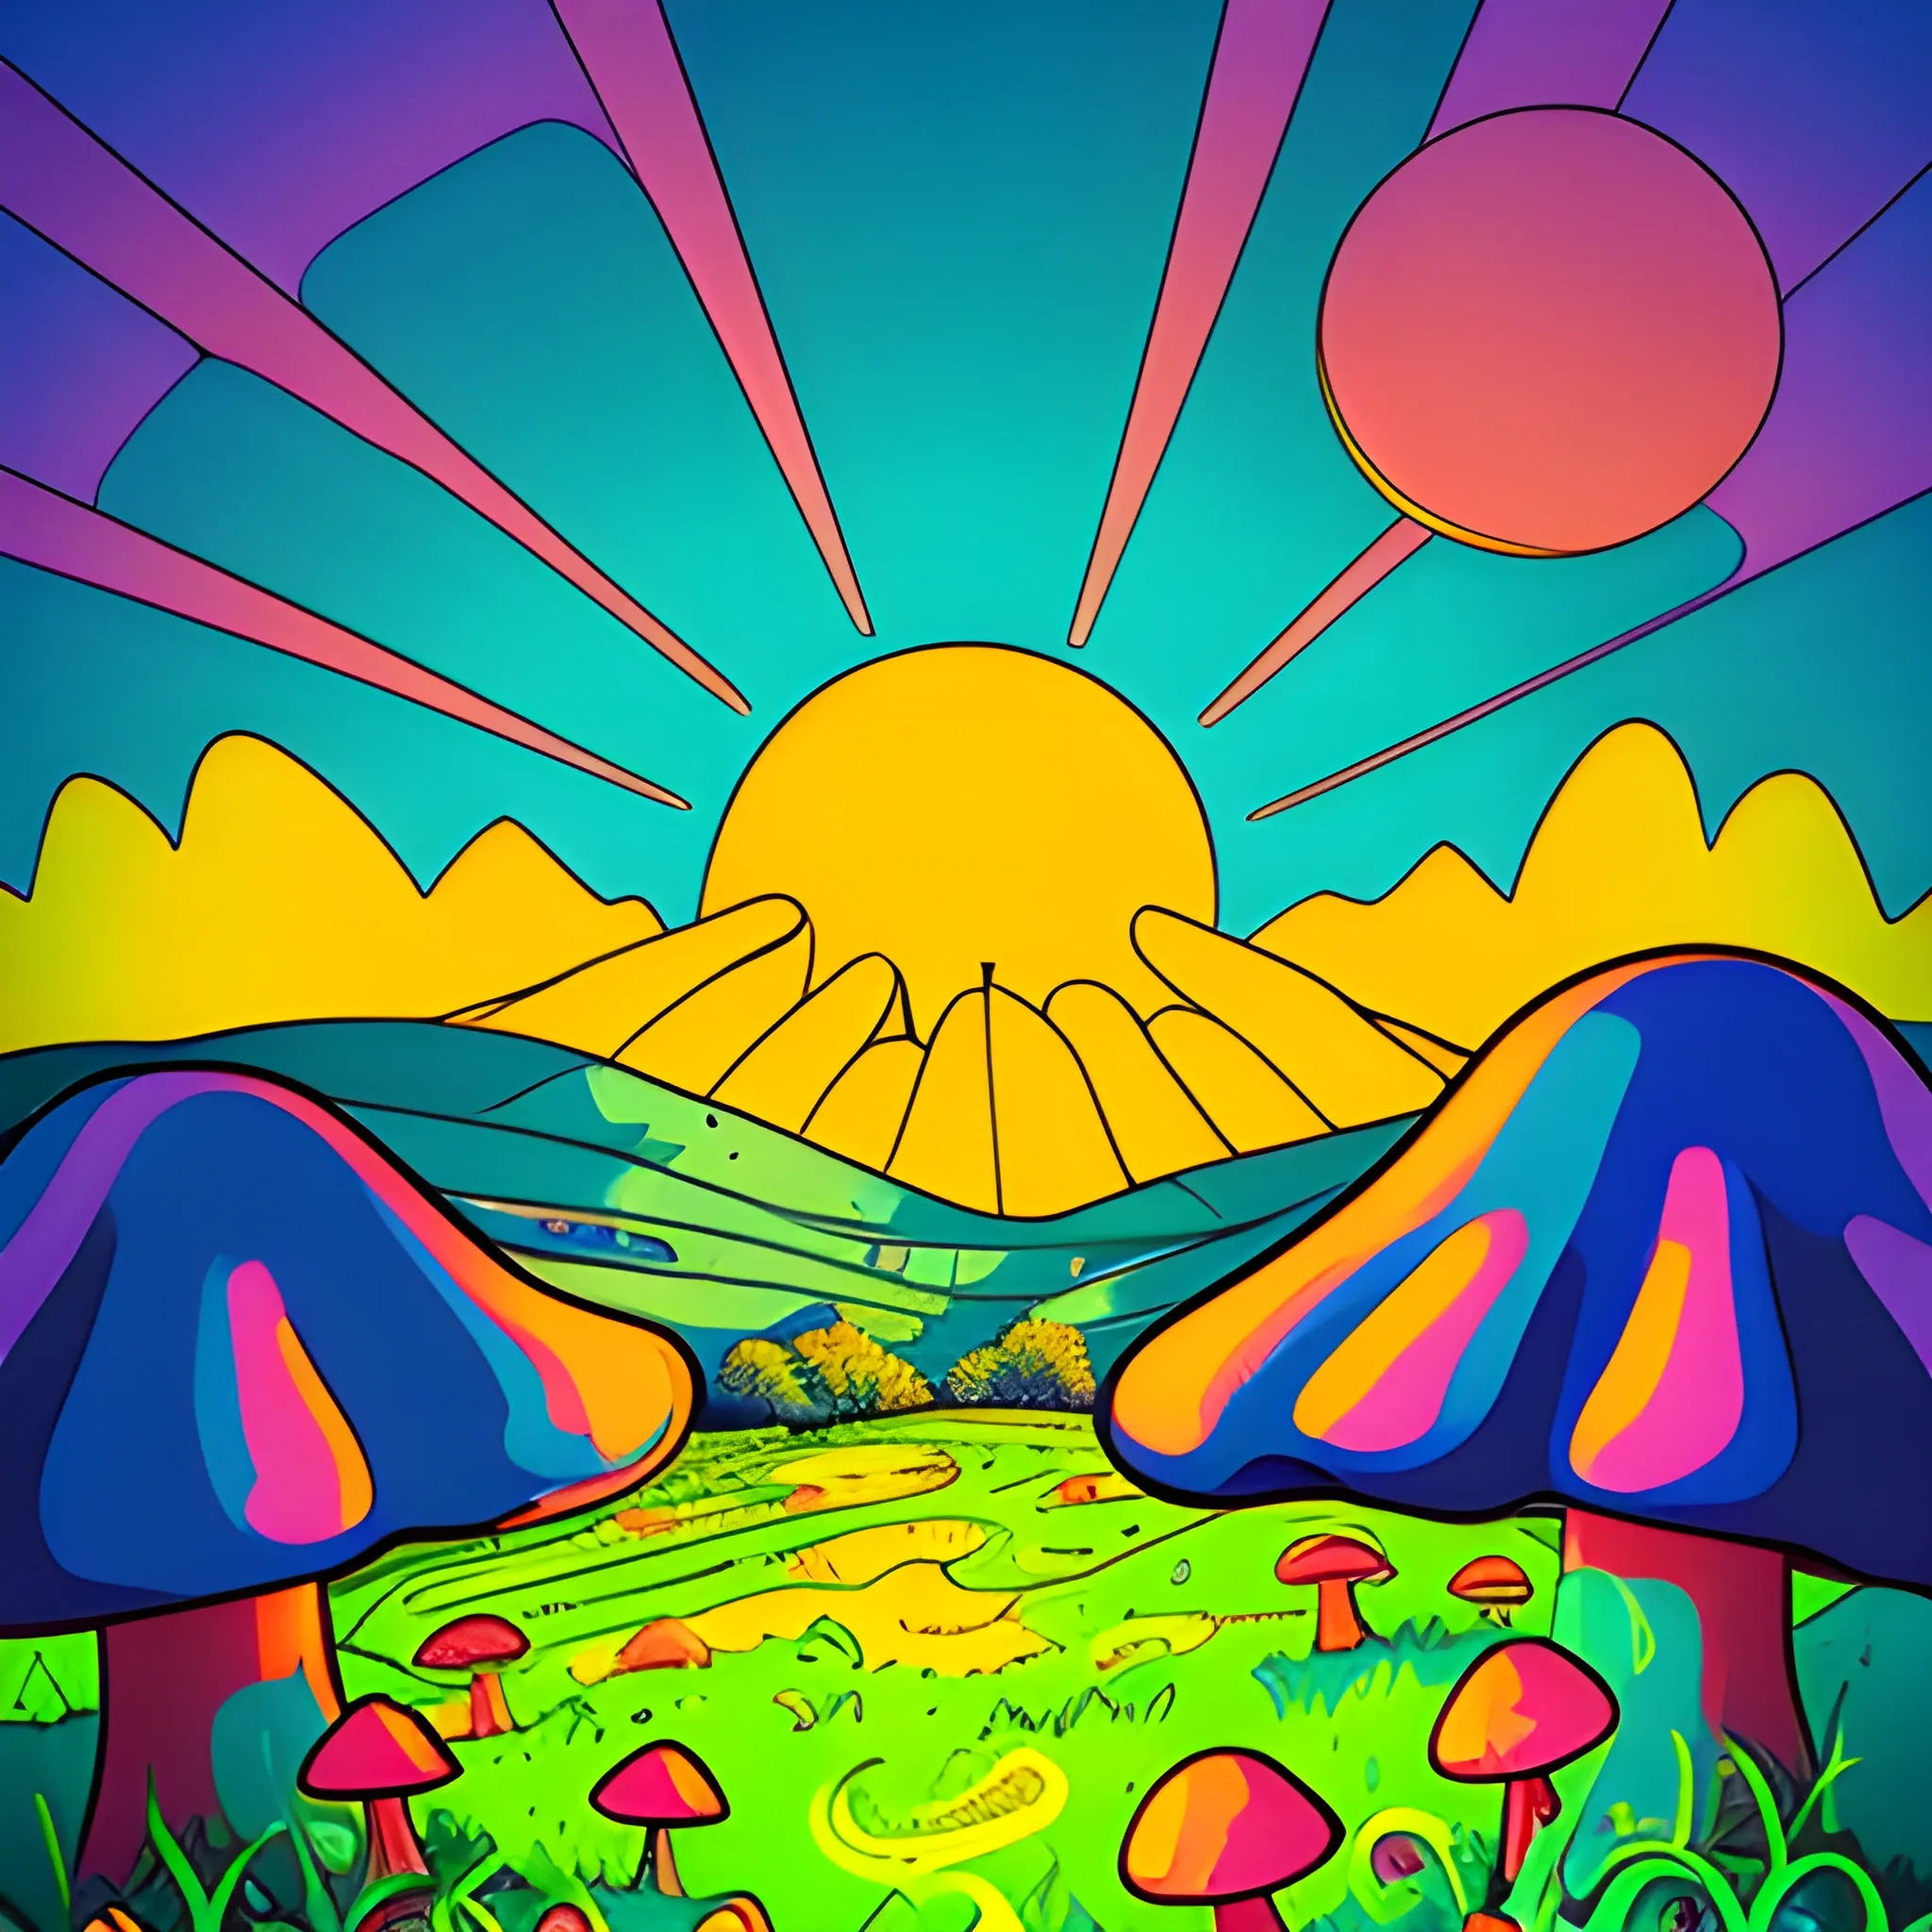 2d, Cartoon, psychedelic vibe, hills with mushrooms and the sun ...